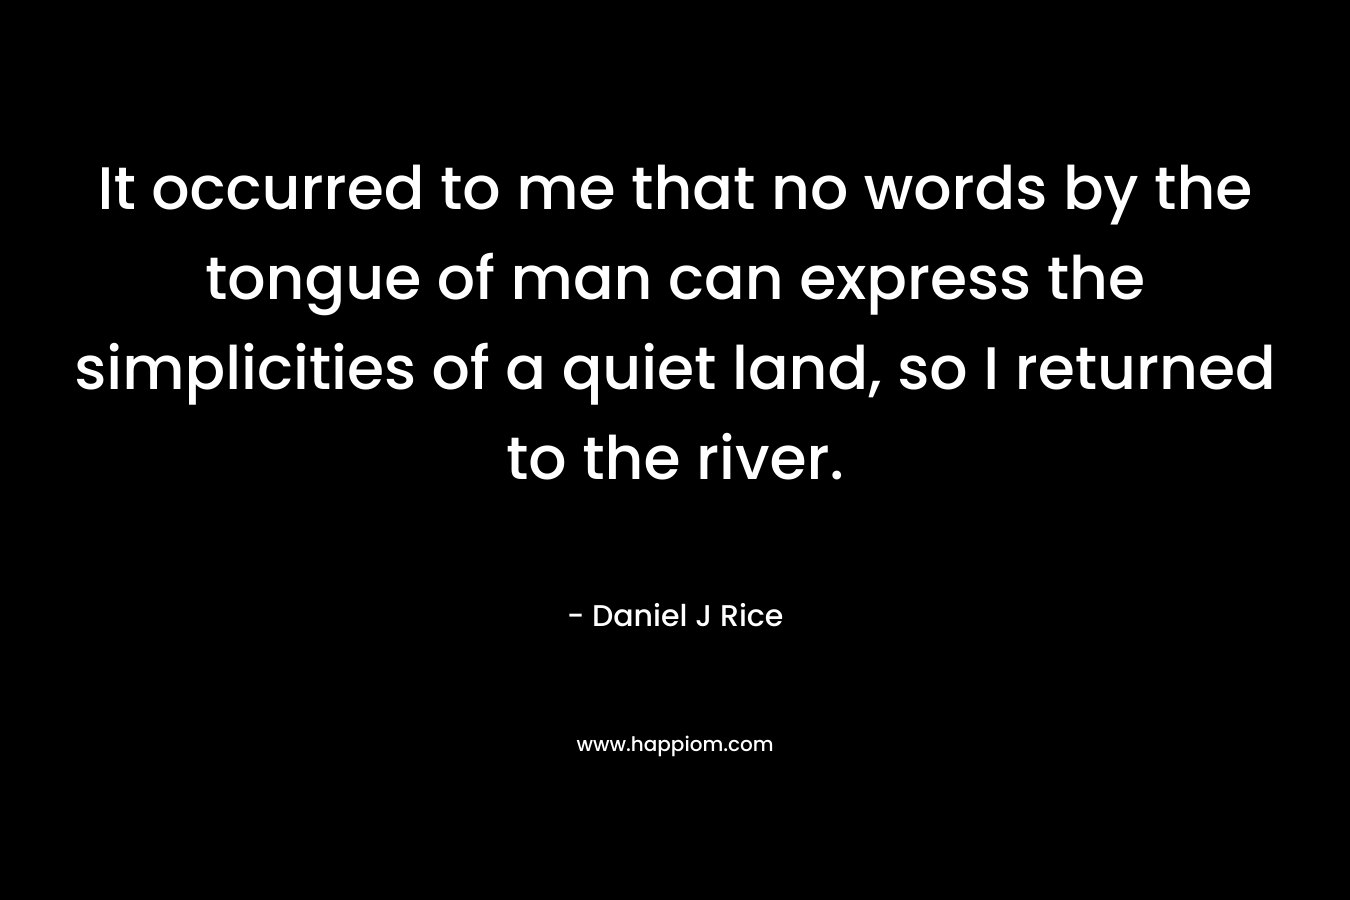 It occurred to me that no words by the tongue of man can express the simplicities of a quiet land, so I returned to the river. – Daniel J Rice